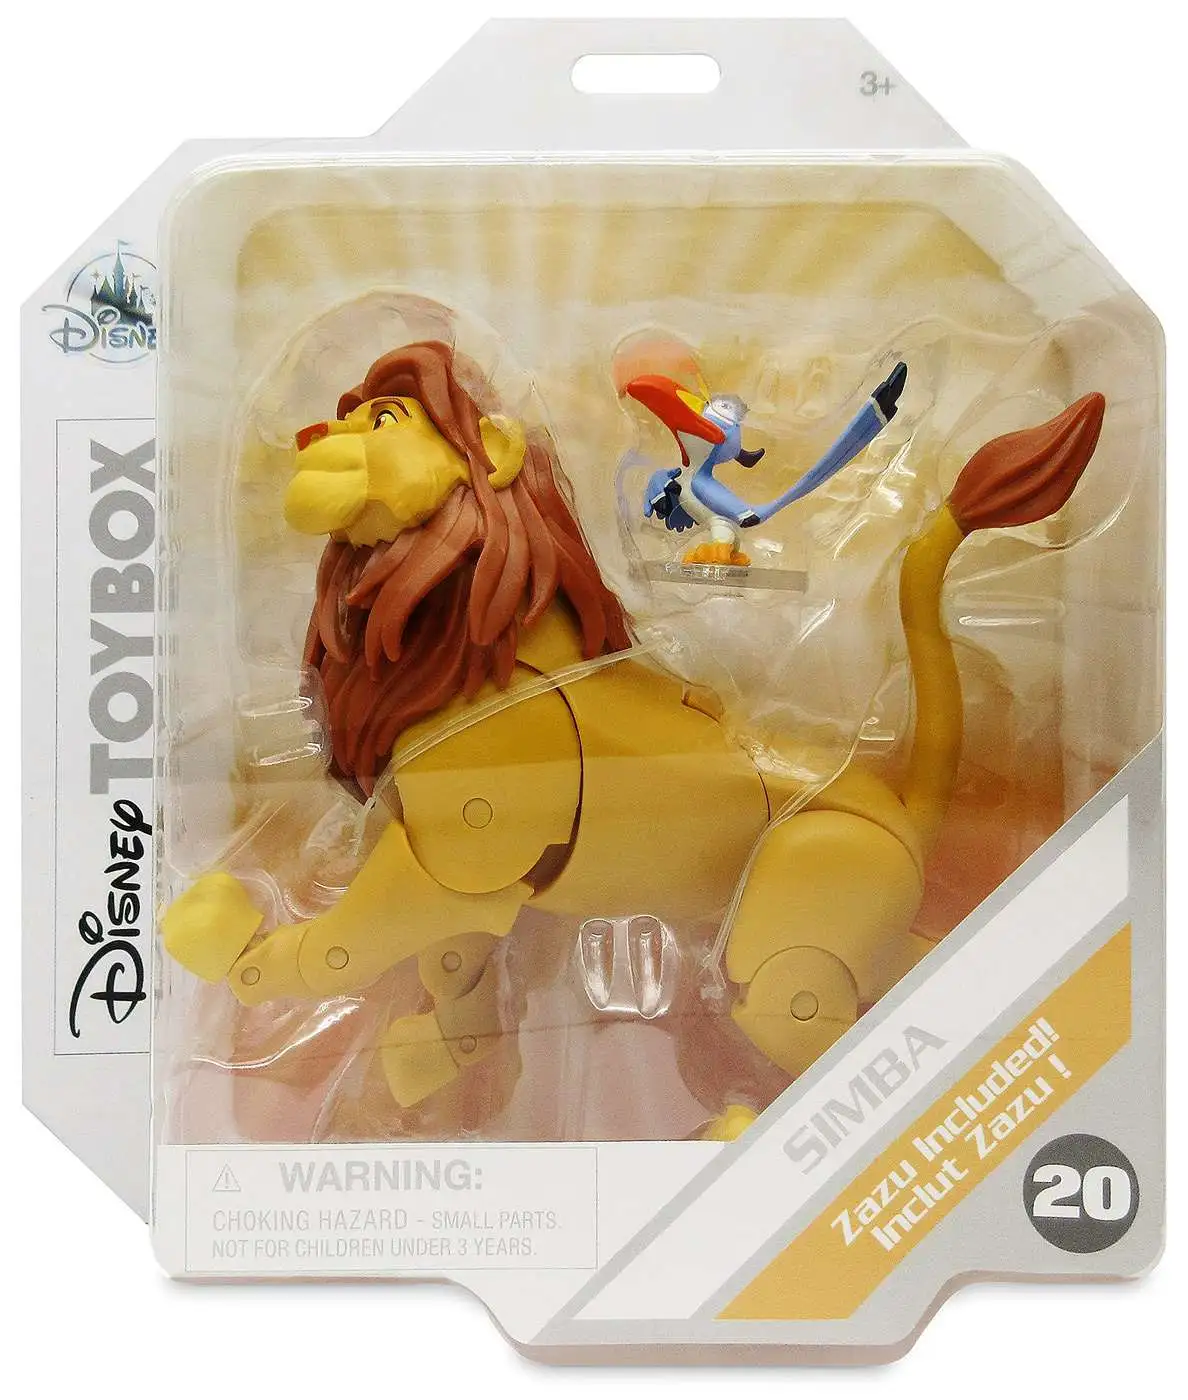 Simba Lion King Special Edition Disney Doorables Disney 100 Years Series 10  SE